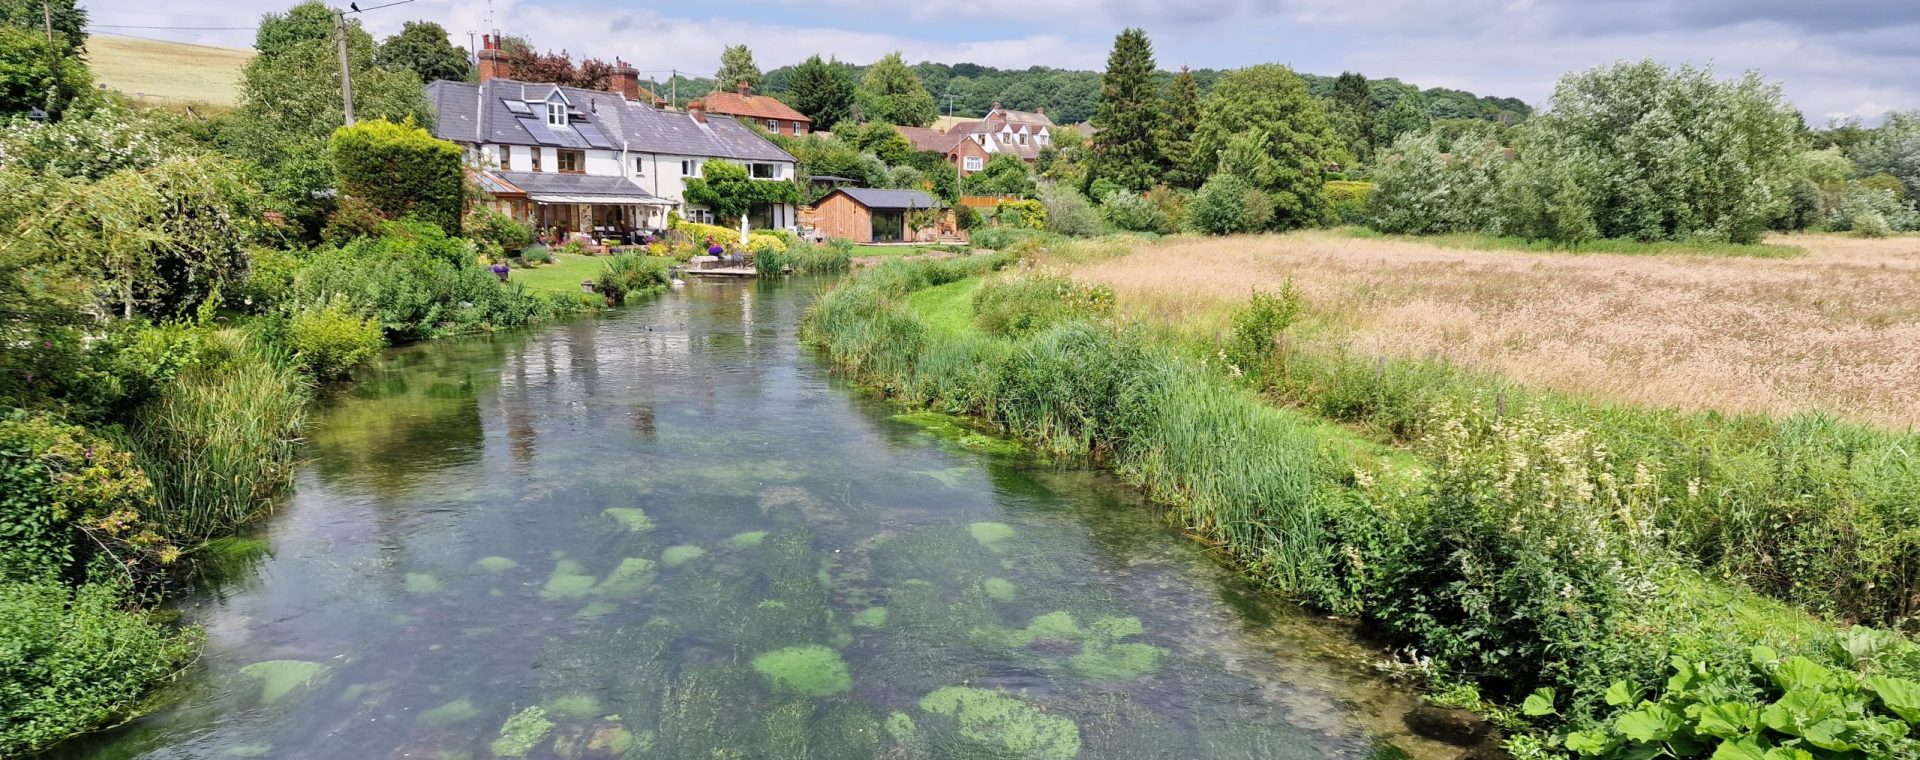 The image shows a scenic view of the River Kennet in Axford. On the left, charming houses with well-tended gardens stretch down to the riverbank, which is lush with greenery and flowers. The clear river reveals patches of aquatic plants and moss-covered rocks beneath the water's surface. The right bank is bordered by tall grasses and wild vegetation, leading to an open field of golden grass. In the background, additional houses and a mix of trees create a picturesque rural setting under a partly cloudy sky. The scene is tranquil and idyllic, highlighting the natural beauty of the River Kennet.